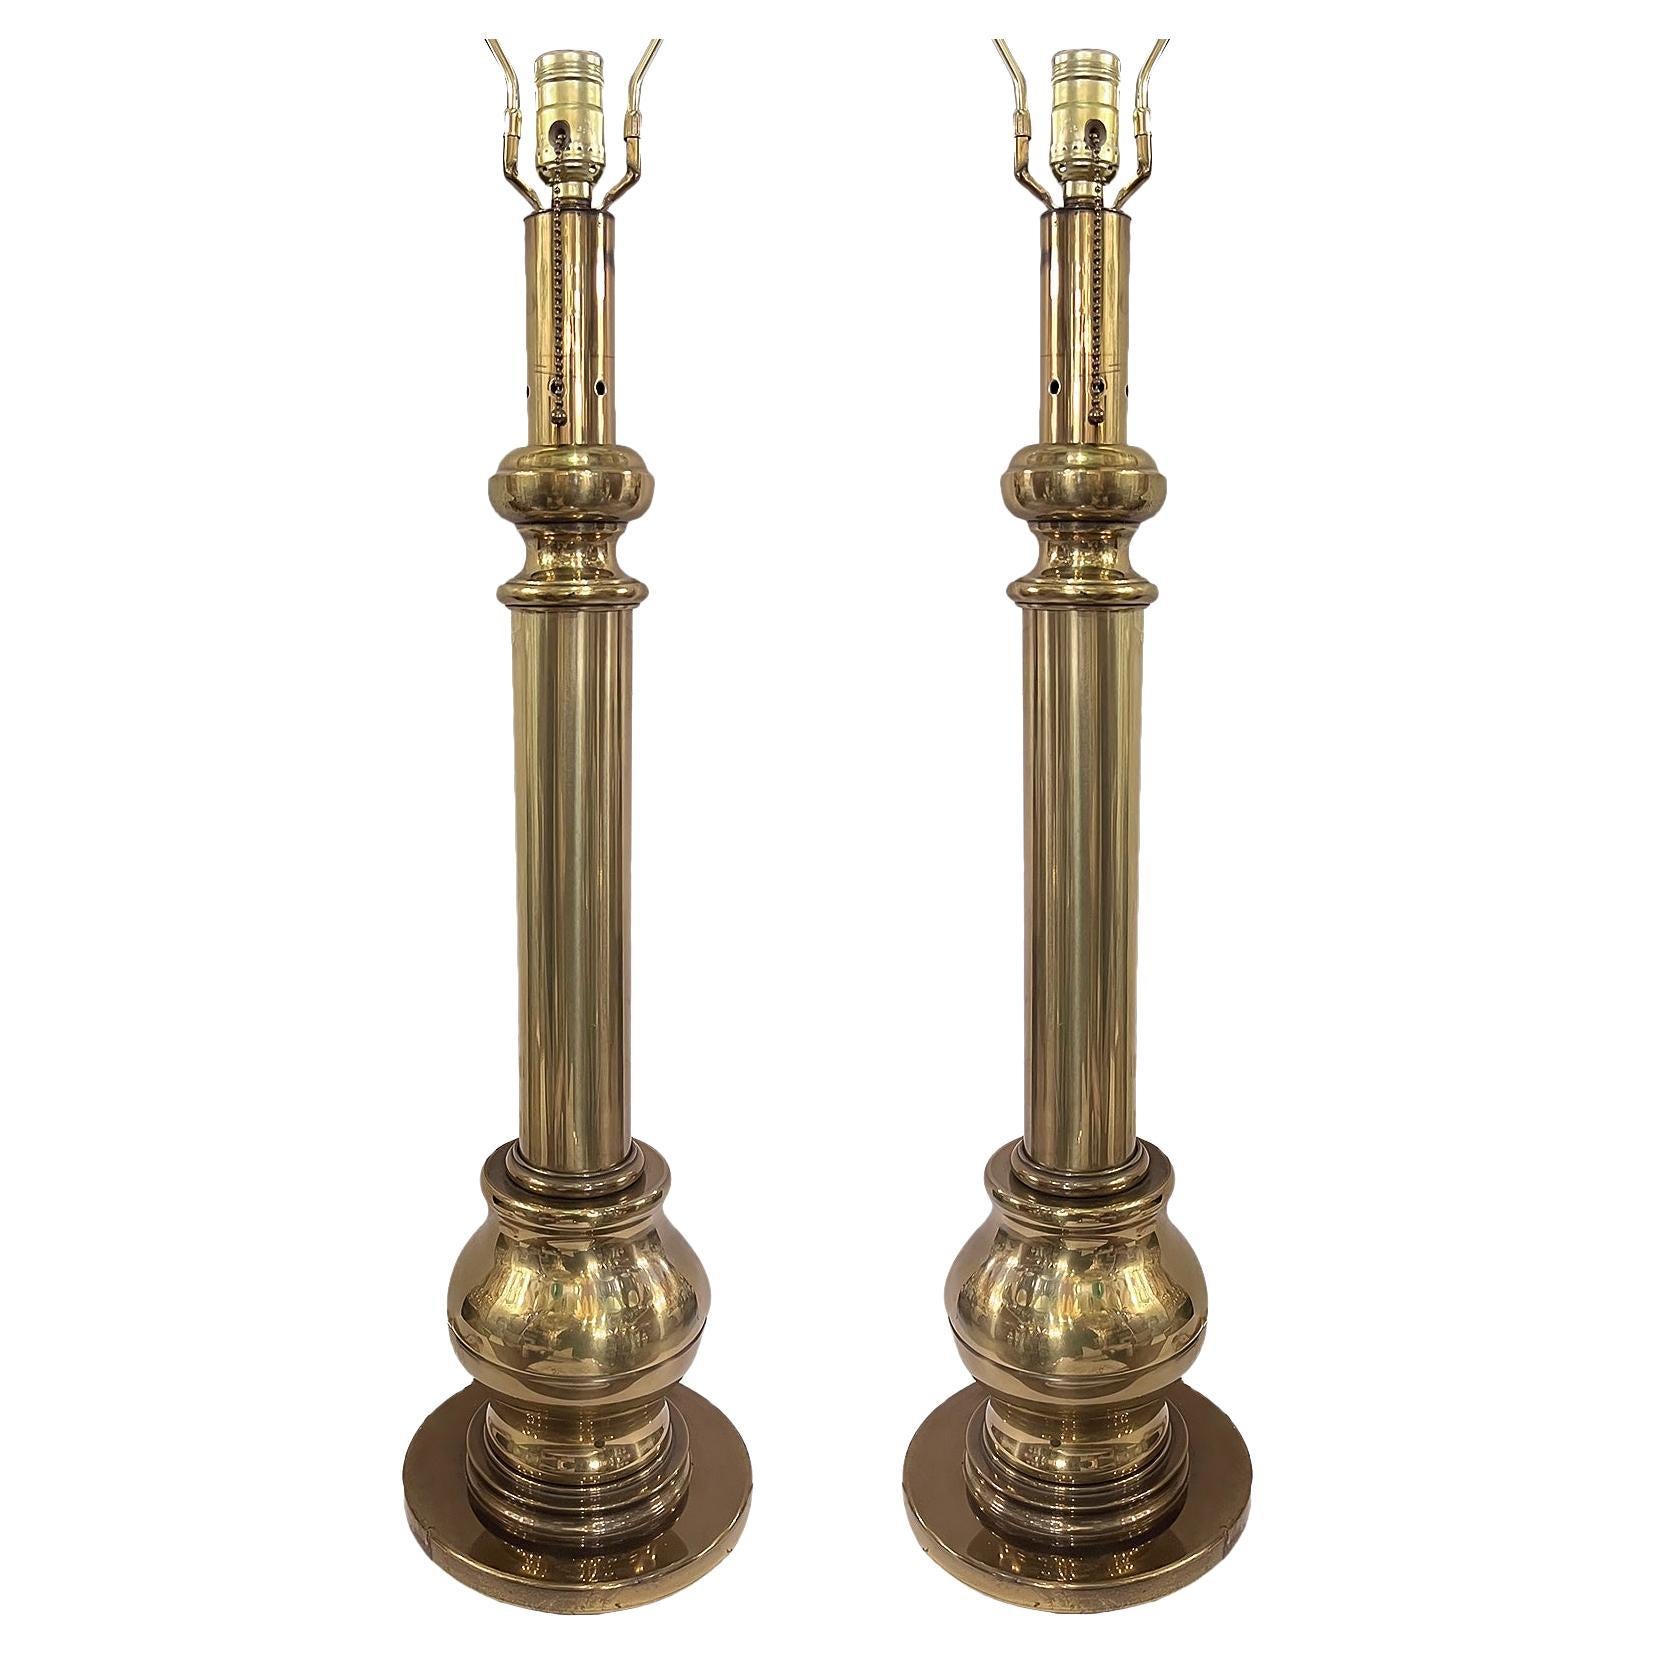 Pair of Tall Moderne Table Lamps